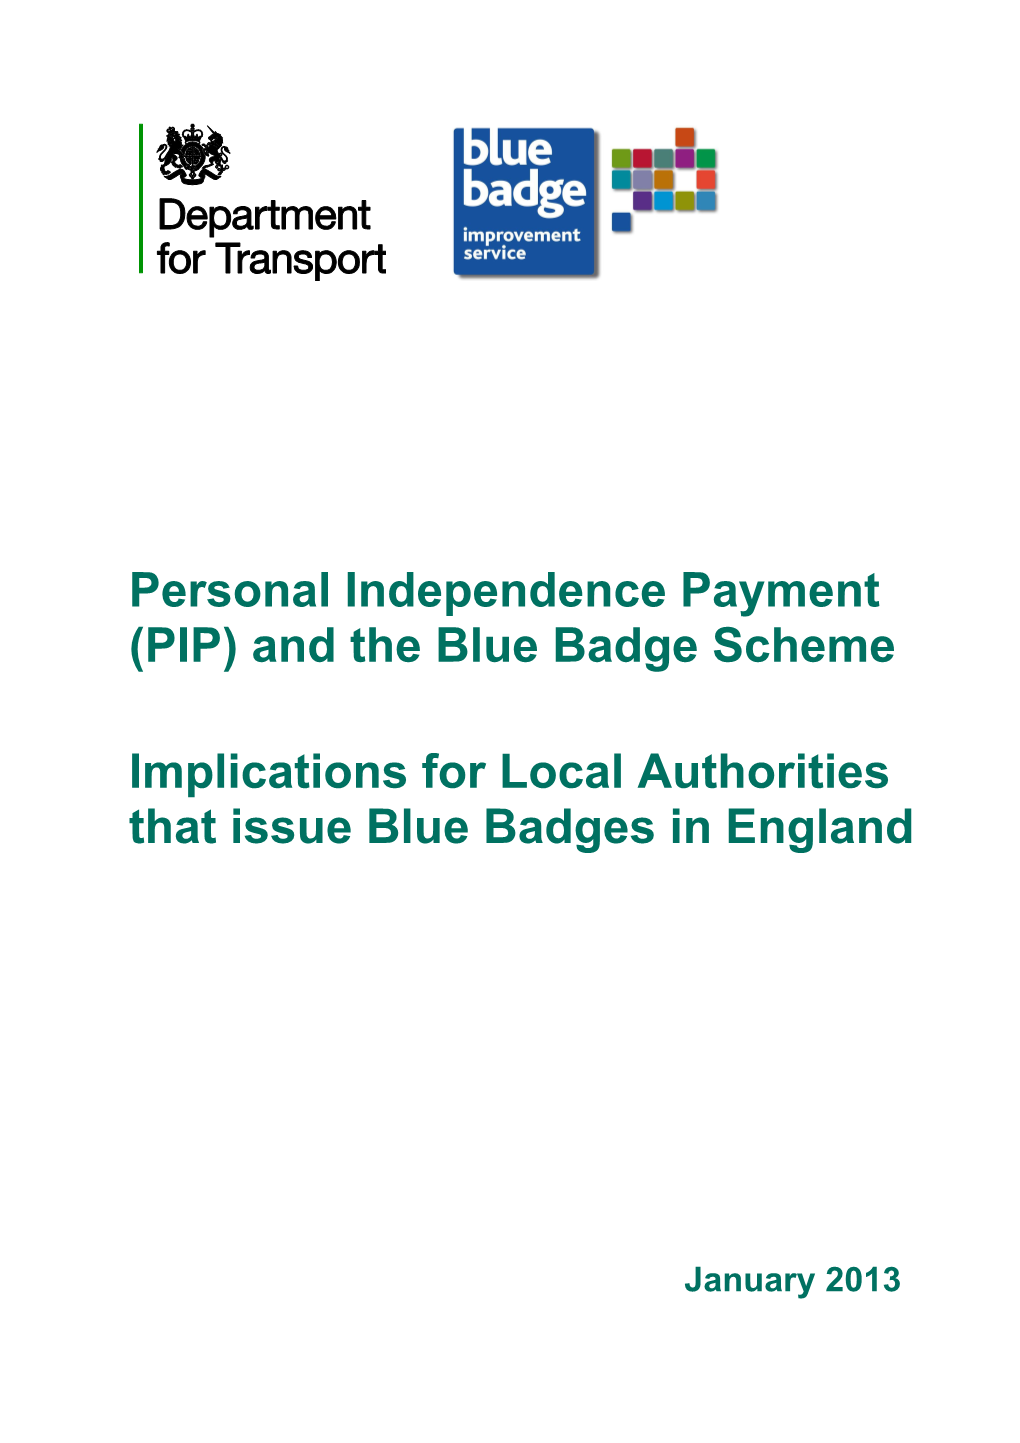 Personal Independence Payment and the Blue Badge Scheme: Implications for Local Authorities